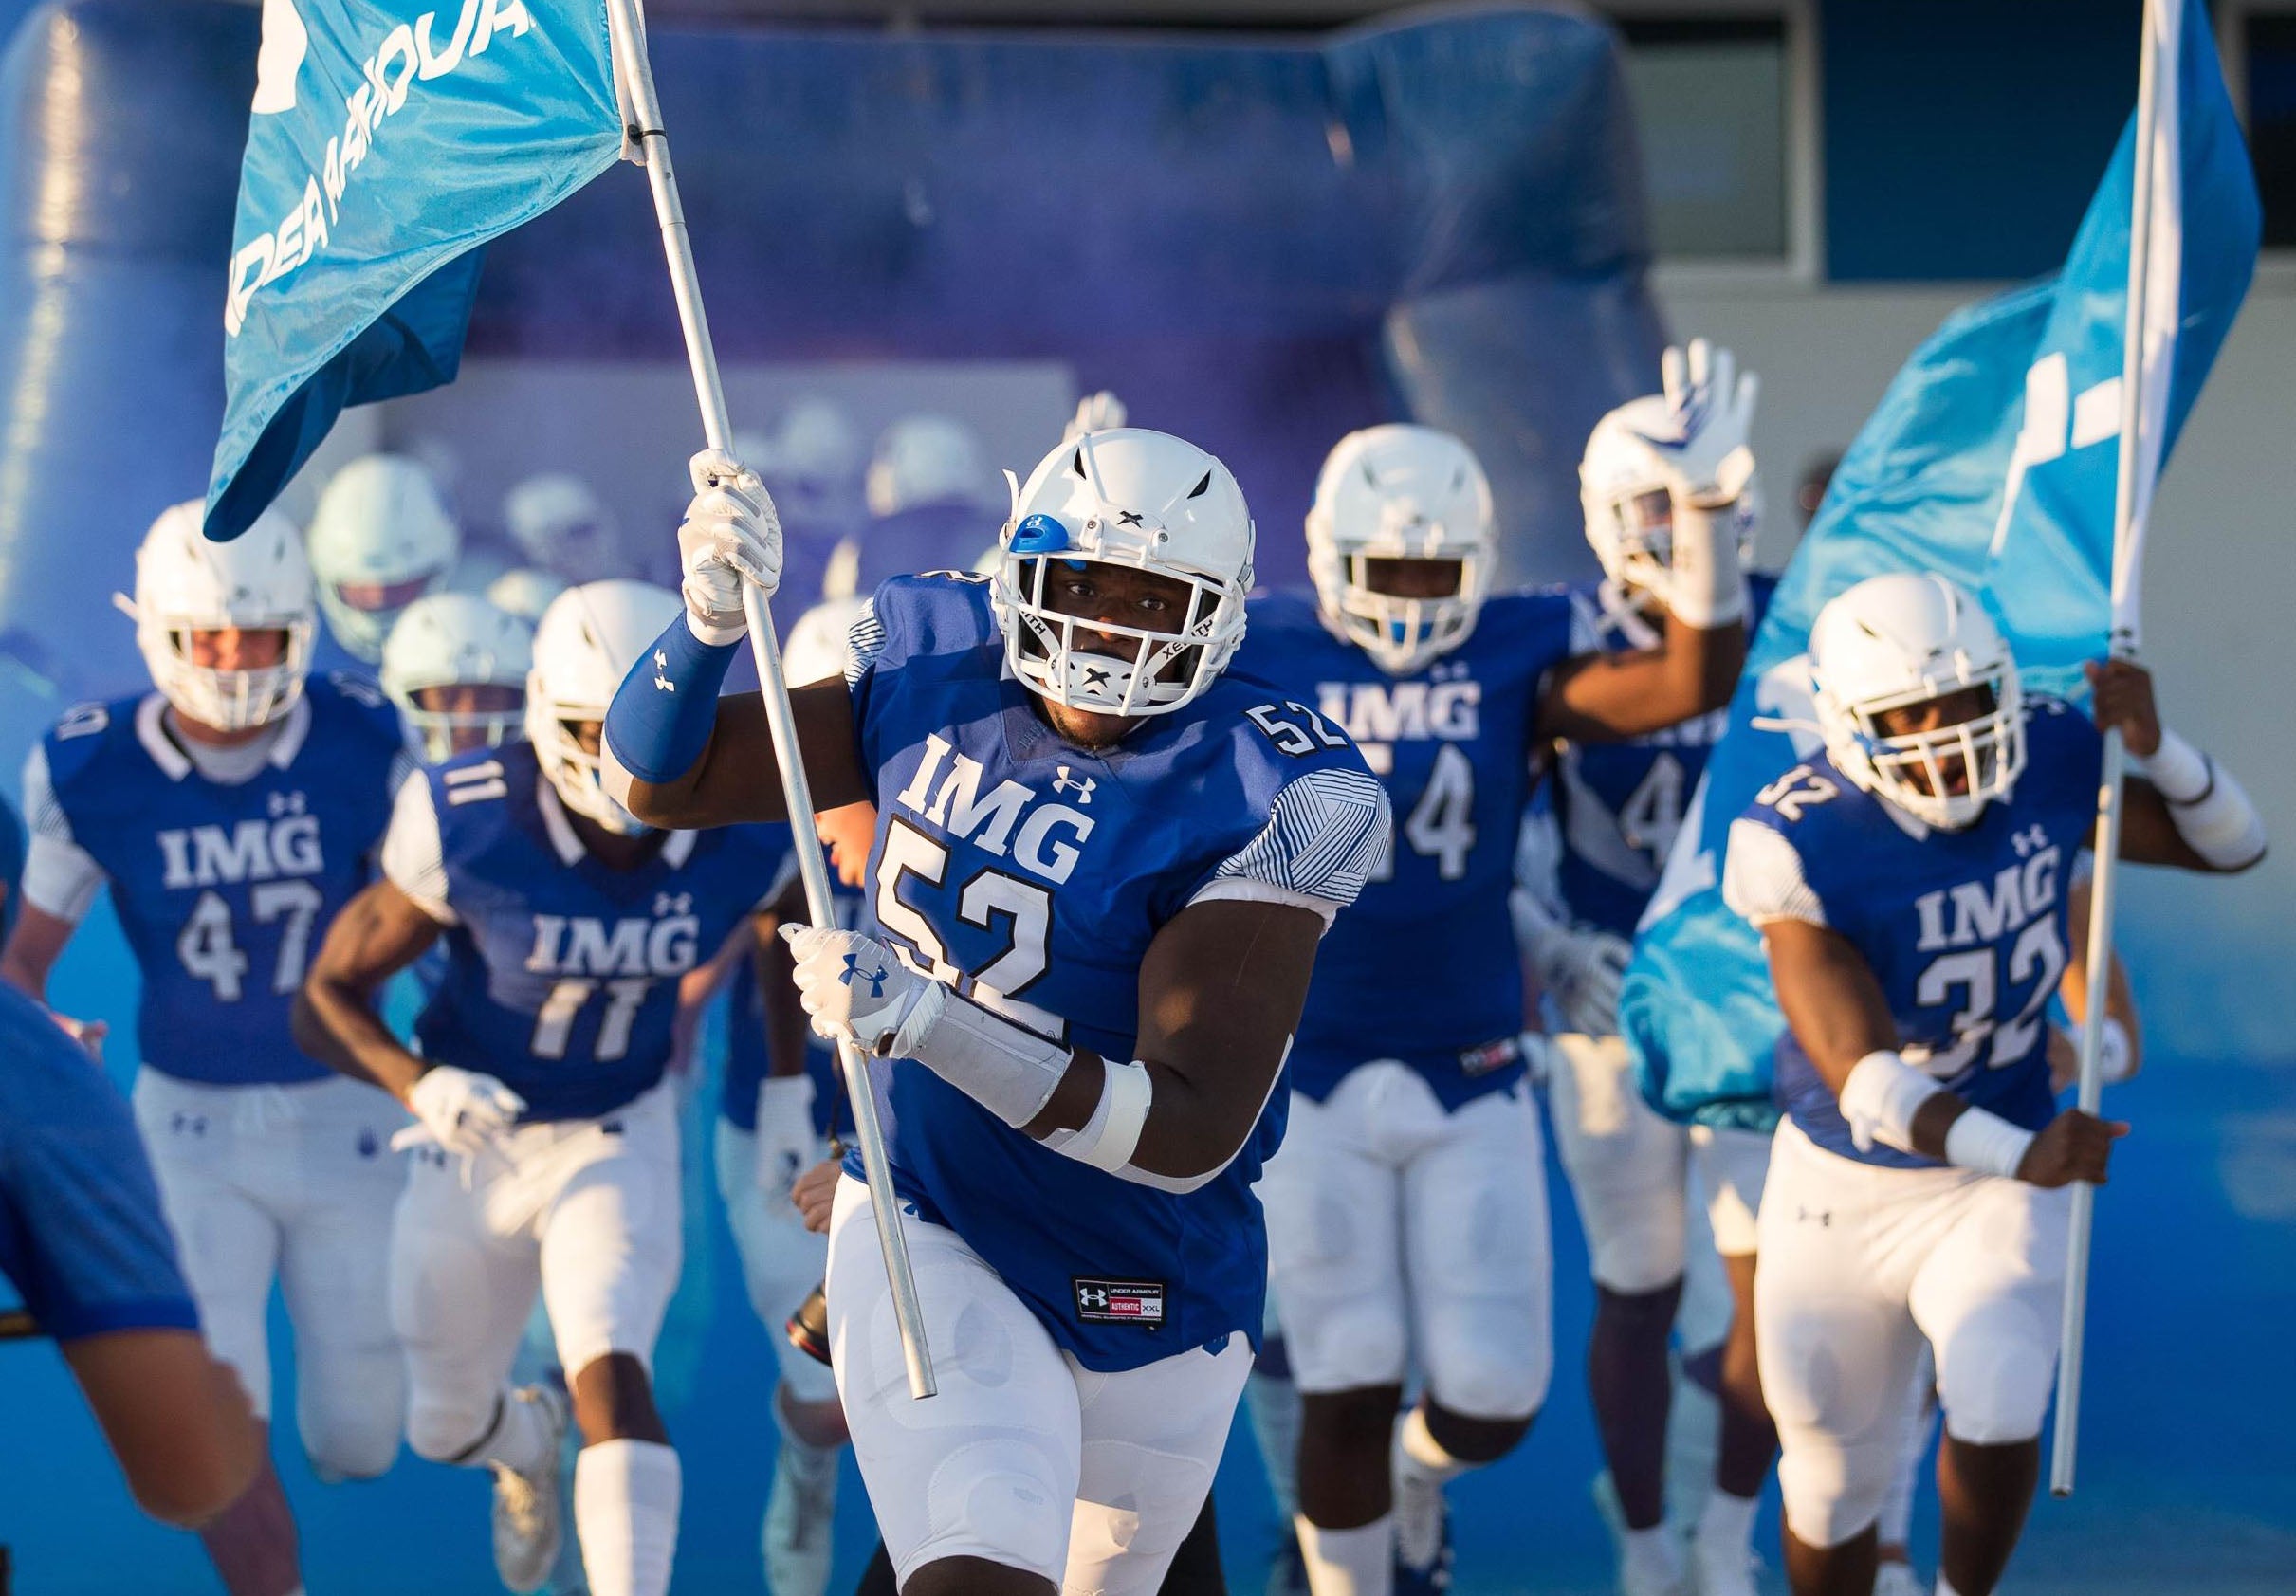 IMG Academy, which is being sold for a reported $1.25 billion, has been a mainstay in the MaxPreps Top 25 national rankings in many sports over the past decade. (Photo: Chris Hull)